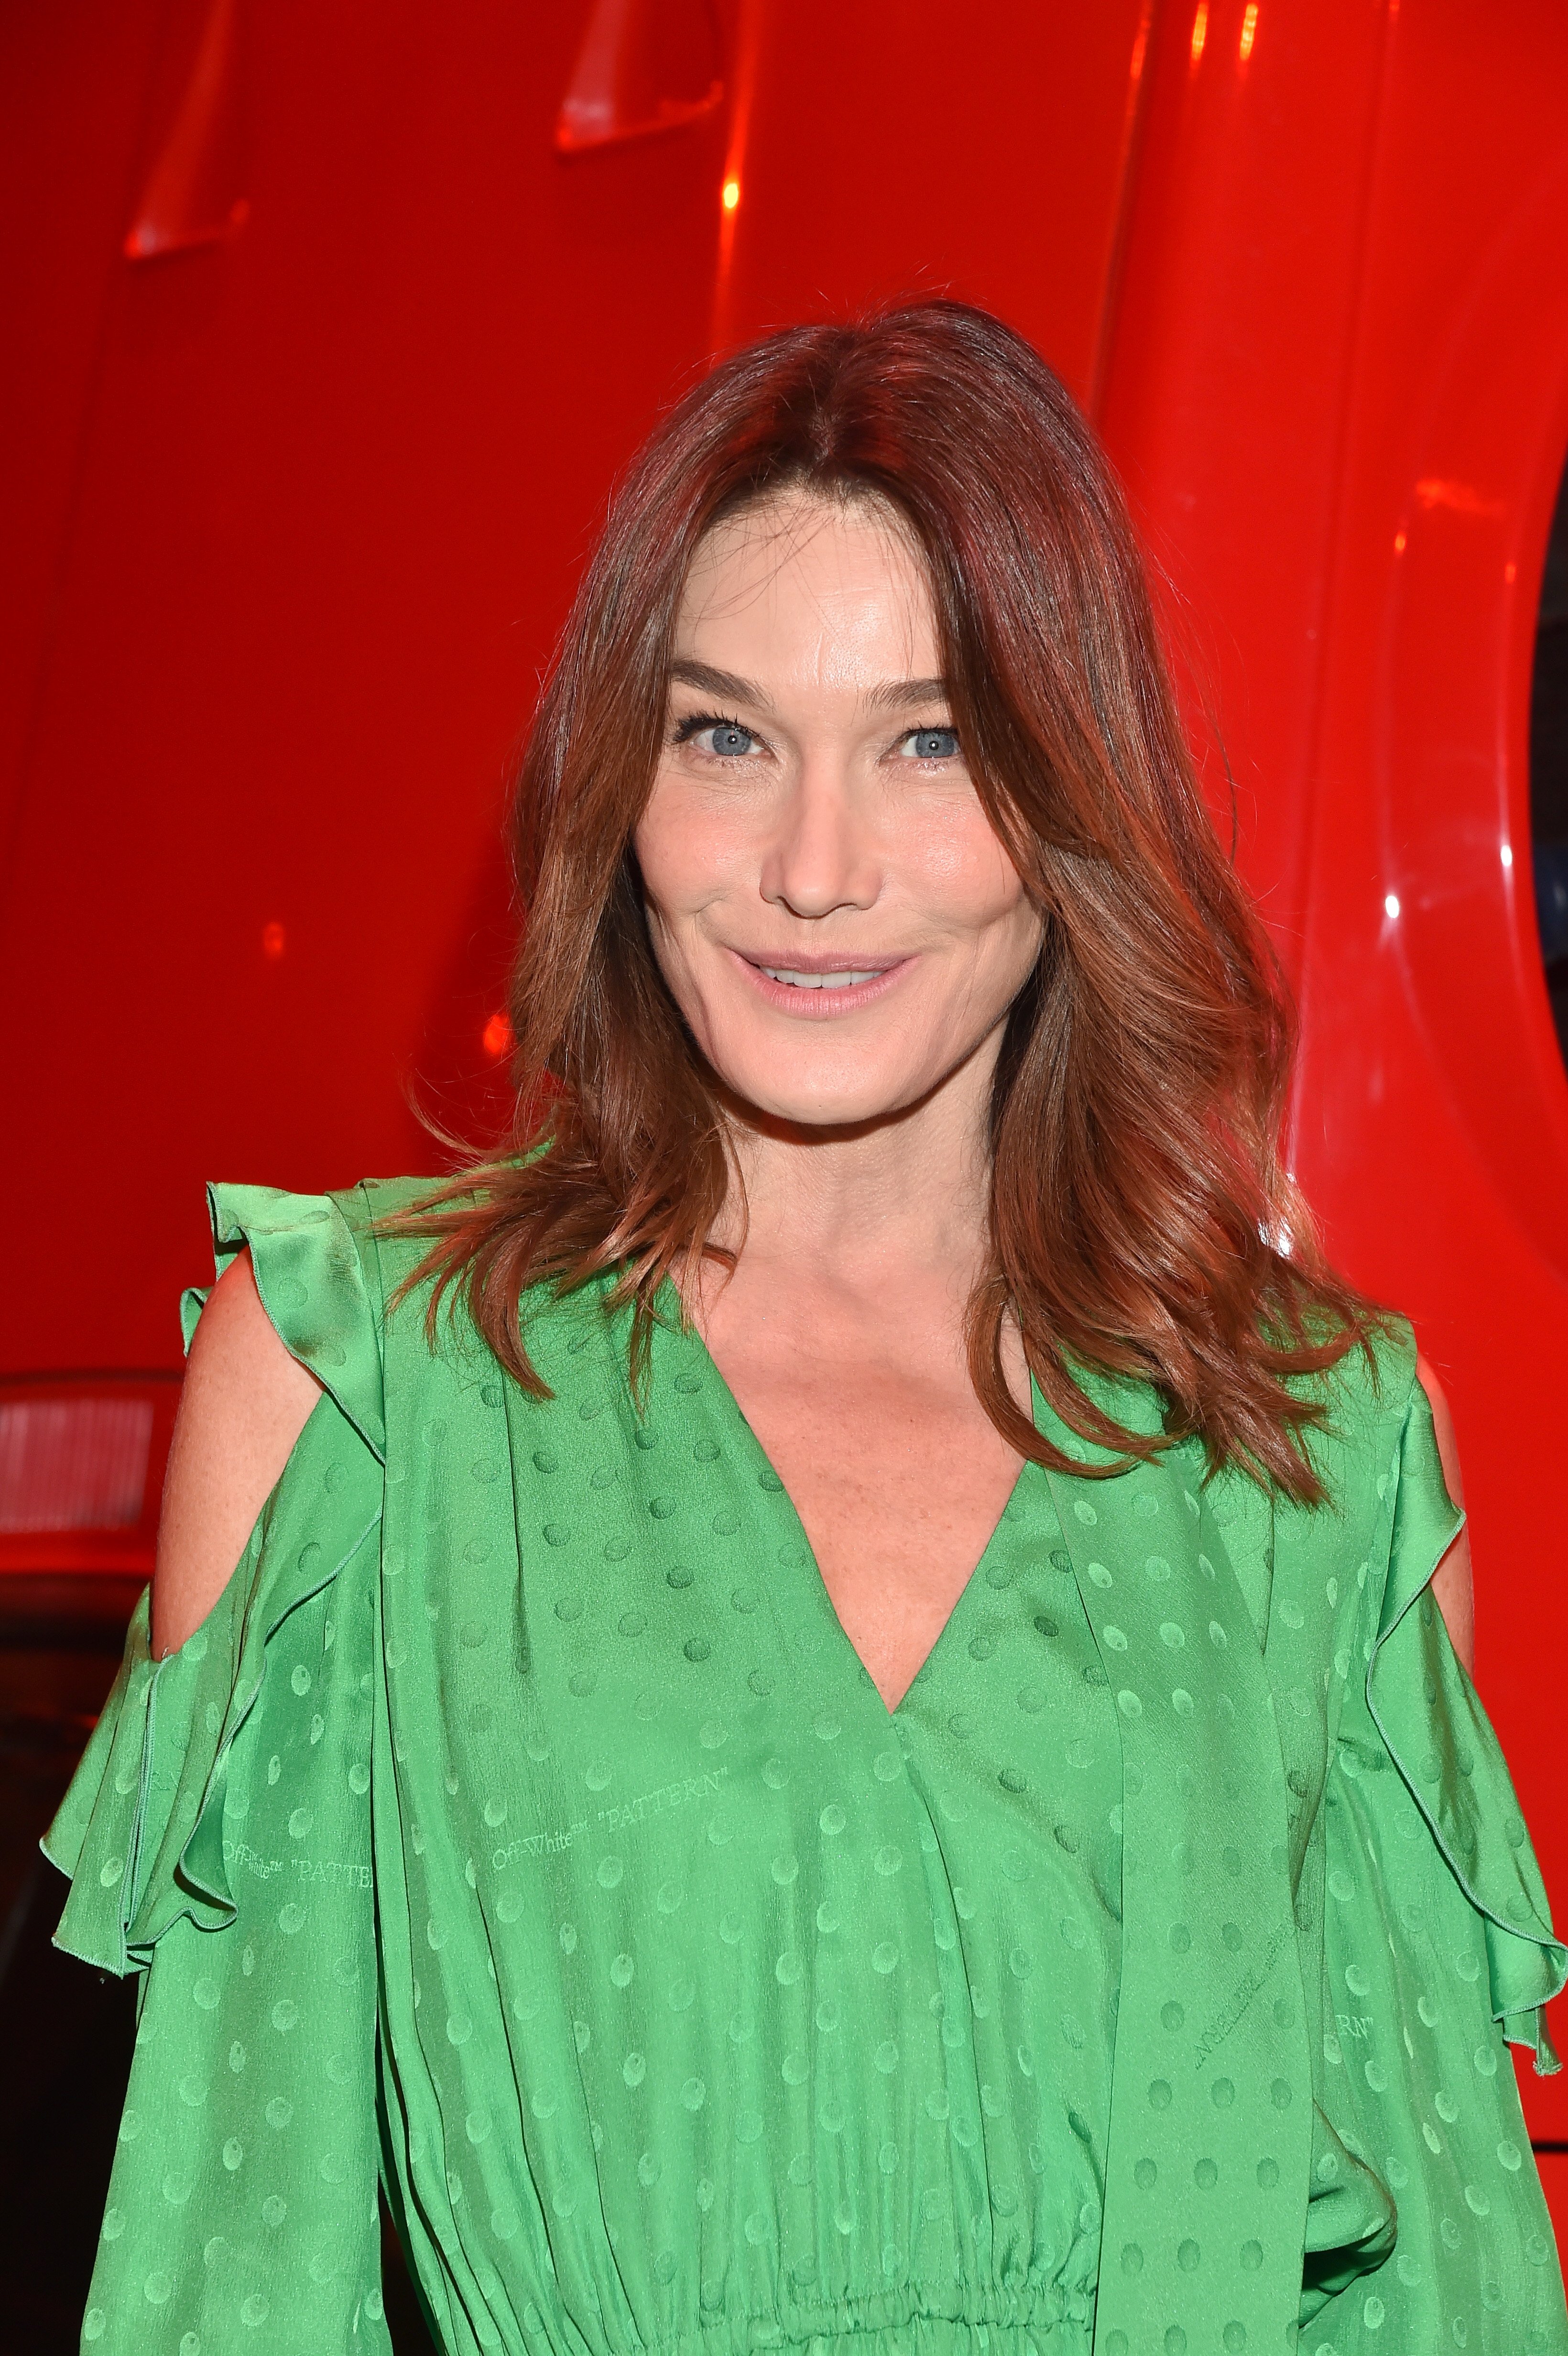 Carla Bruni attends the Off-White show at the Paris Fashion Week Womenswear Fall/Winter 2020/2021 on February 27, 2020 in Paris, France. | Photo: Getty Images